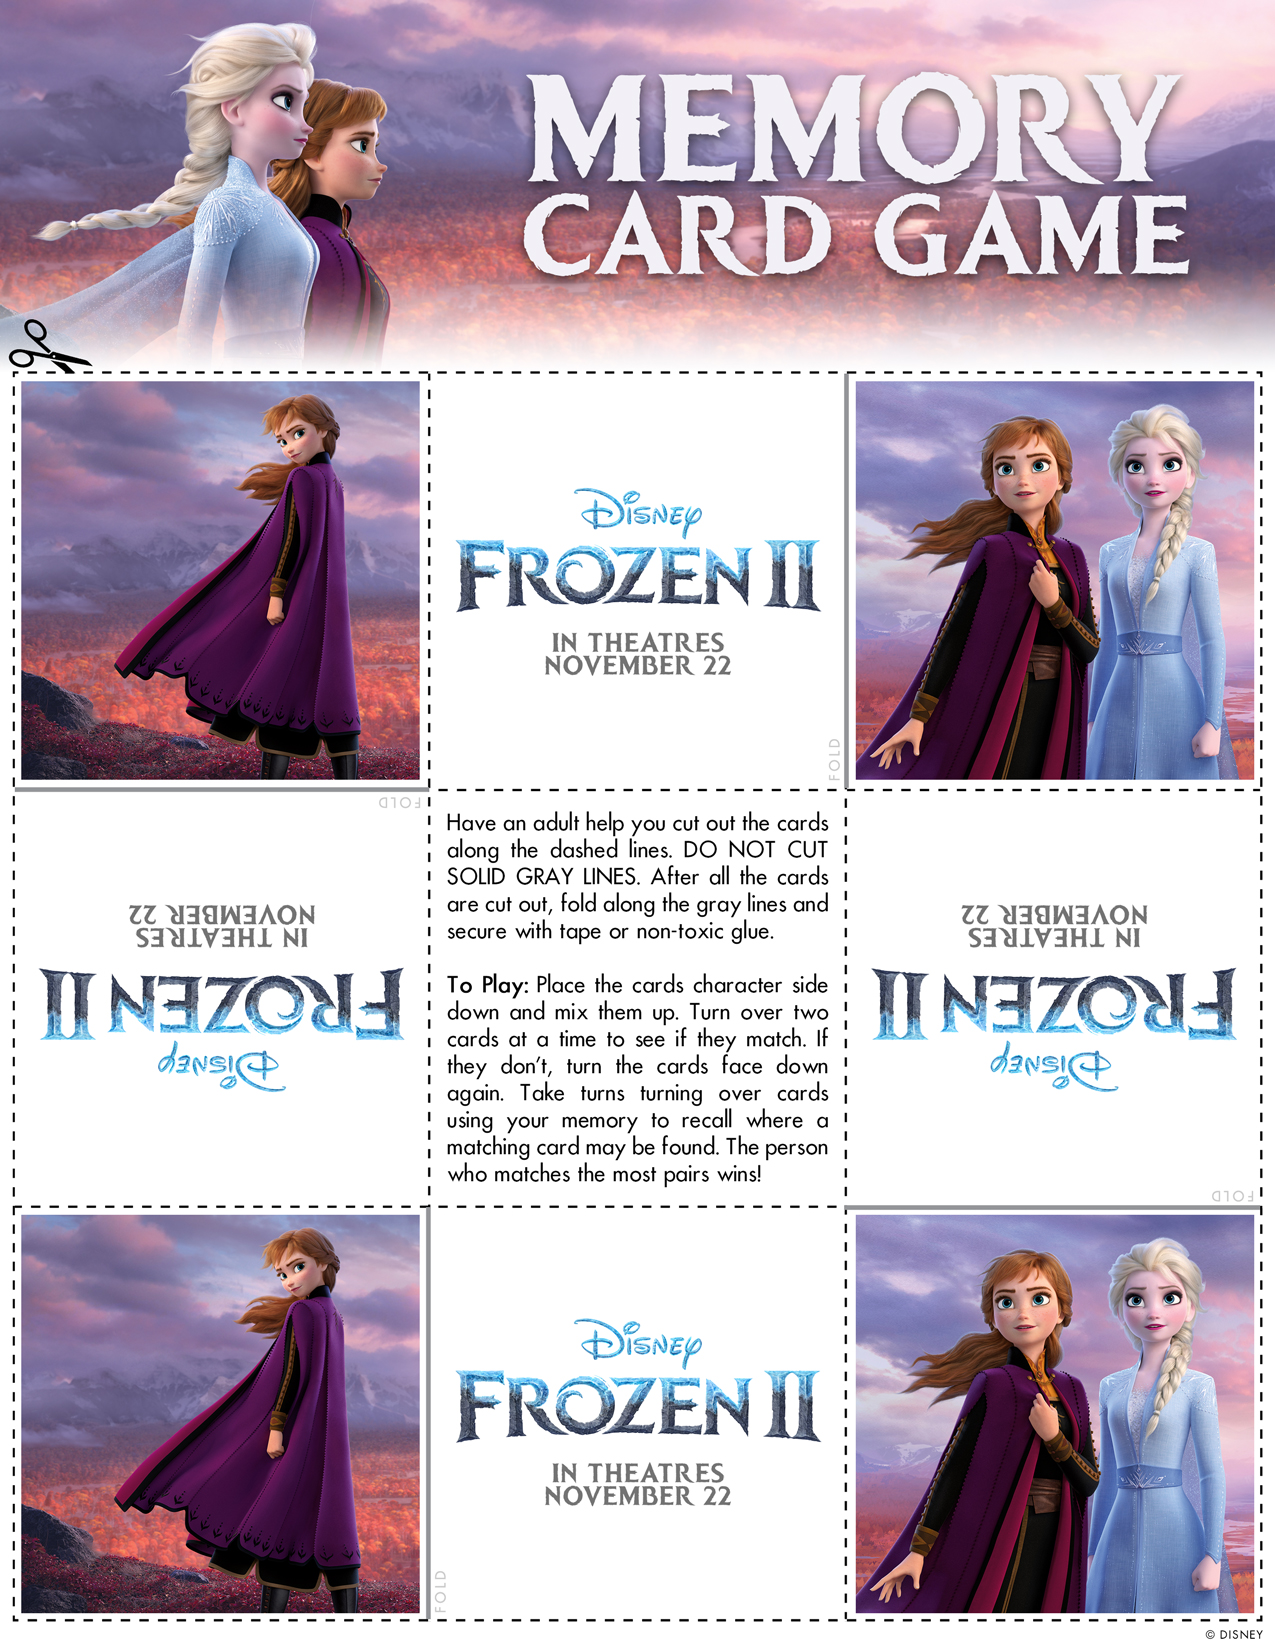 MemoryGame_Frozen2_Page1